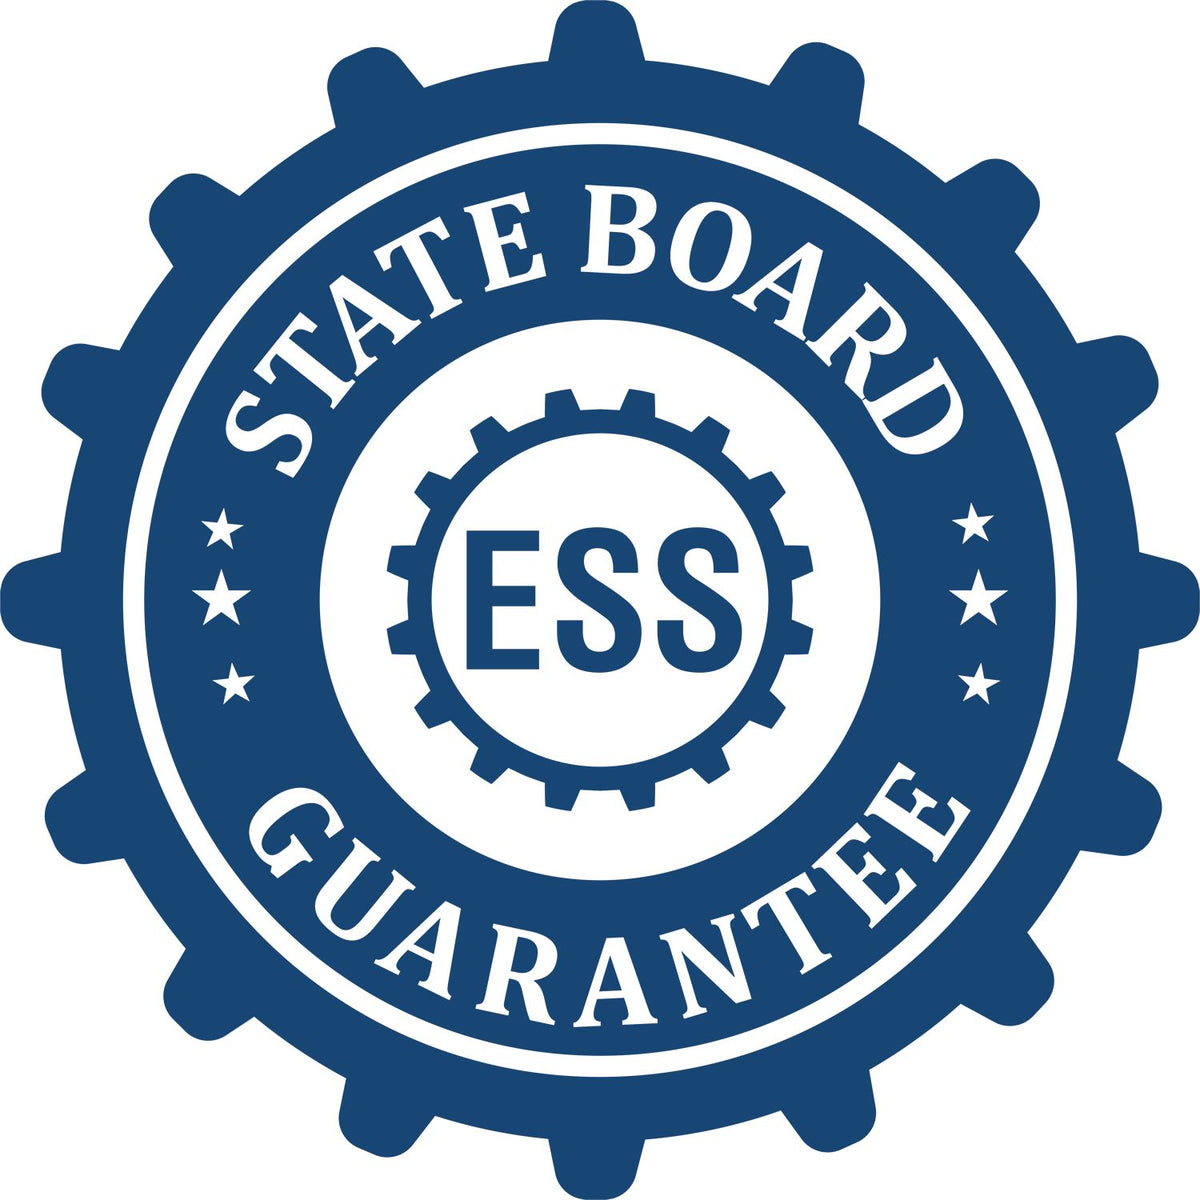 An emblem in a gear shape illustrating a state board guarantee for the State of Massachusetts Extended Long Reach Geologist Seal